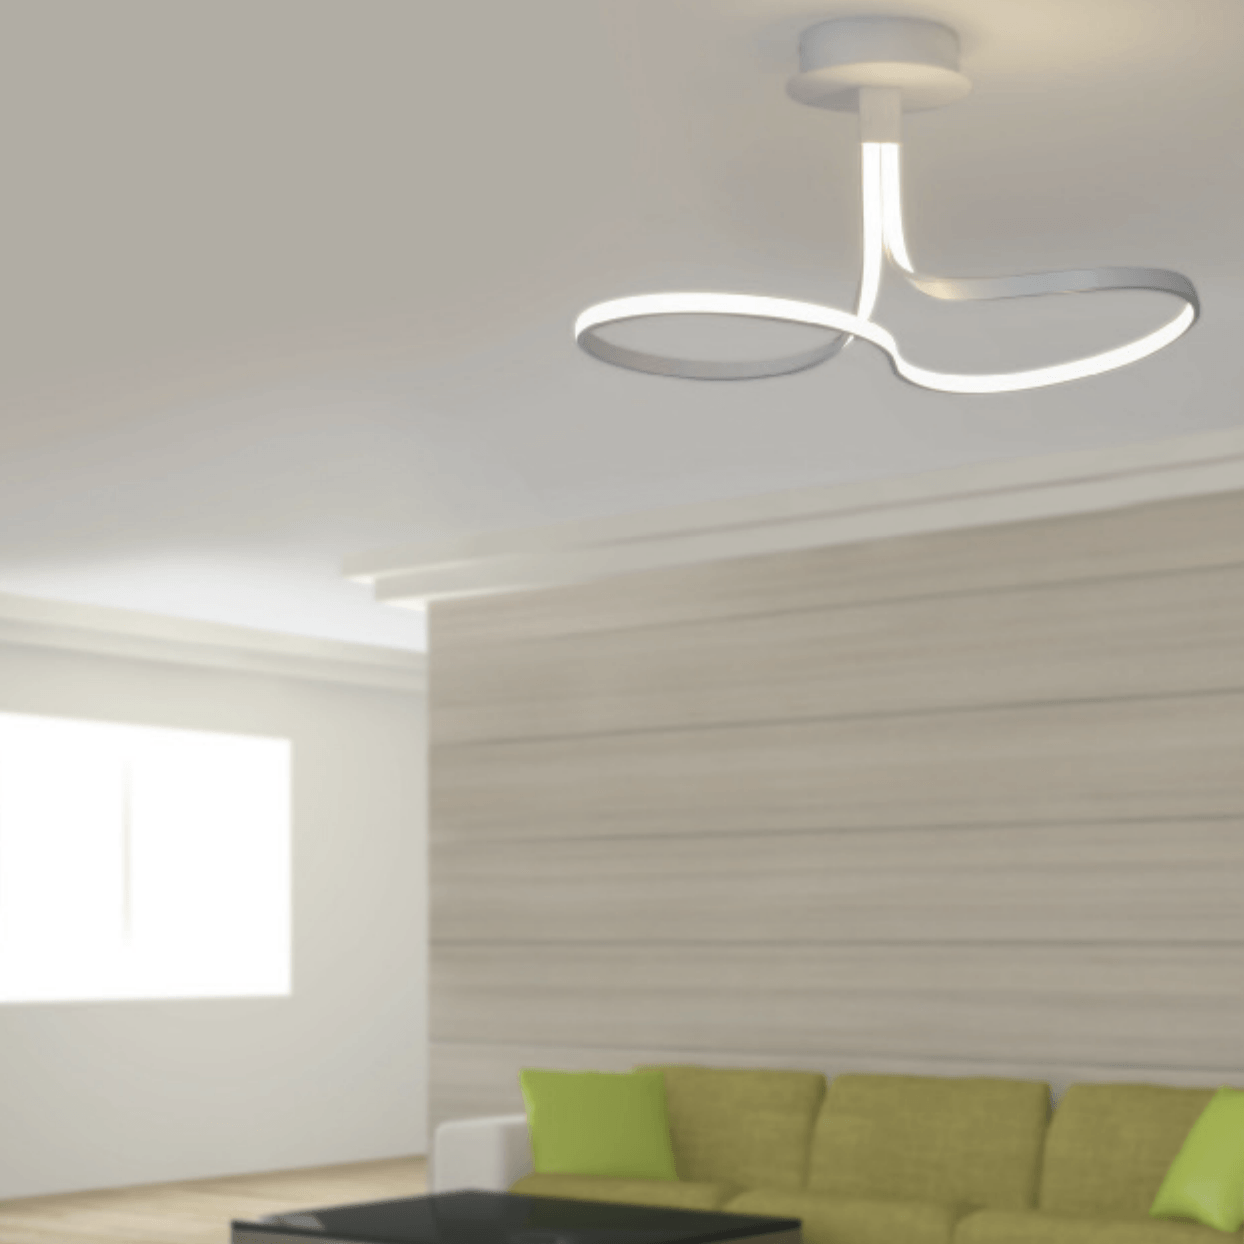 Looped Abstract Ceiling Light - ID 7425 discontinued